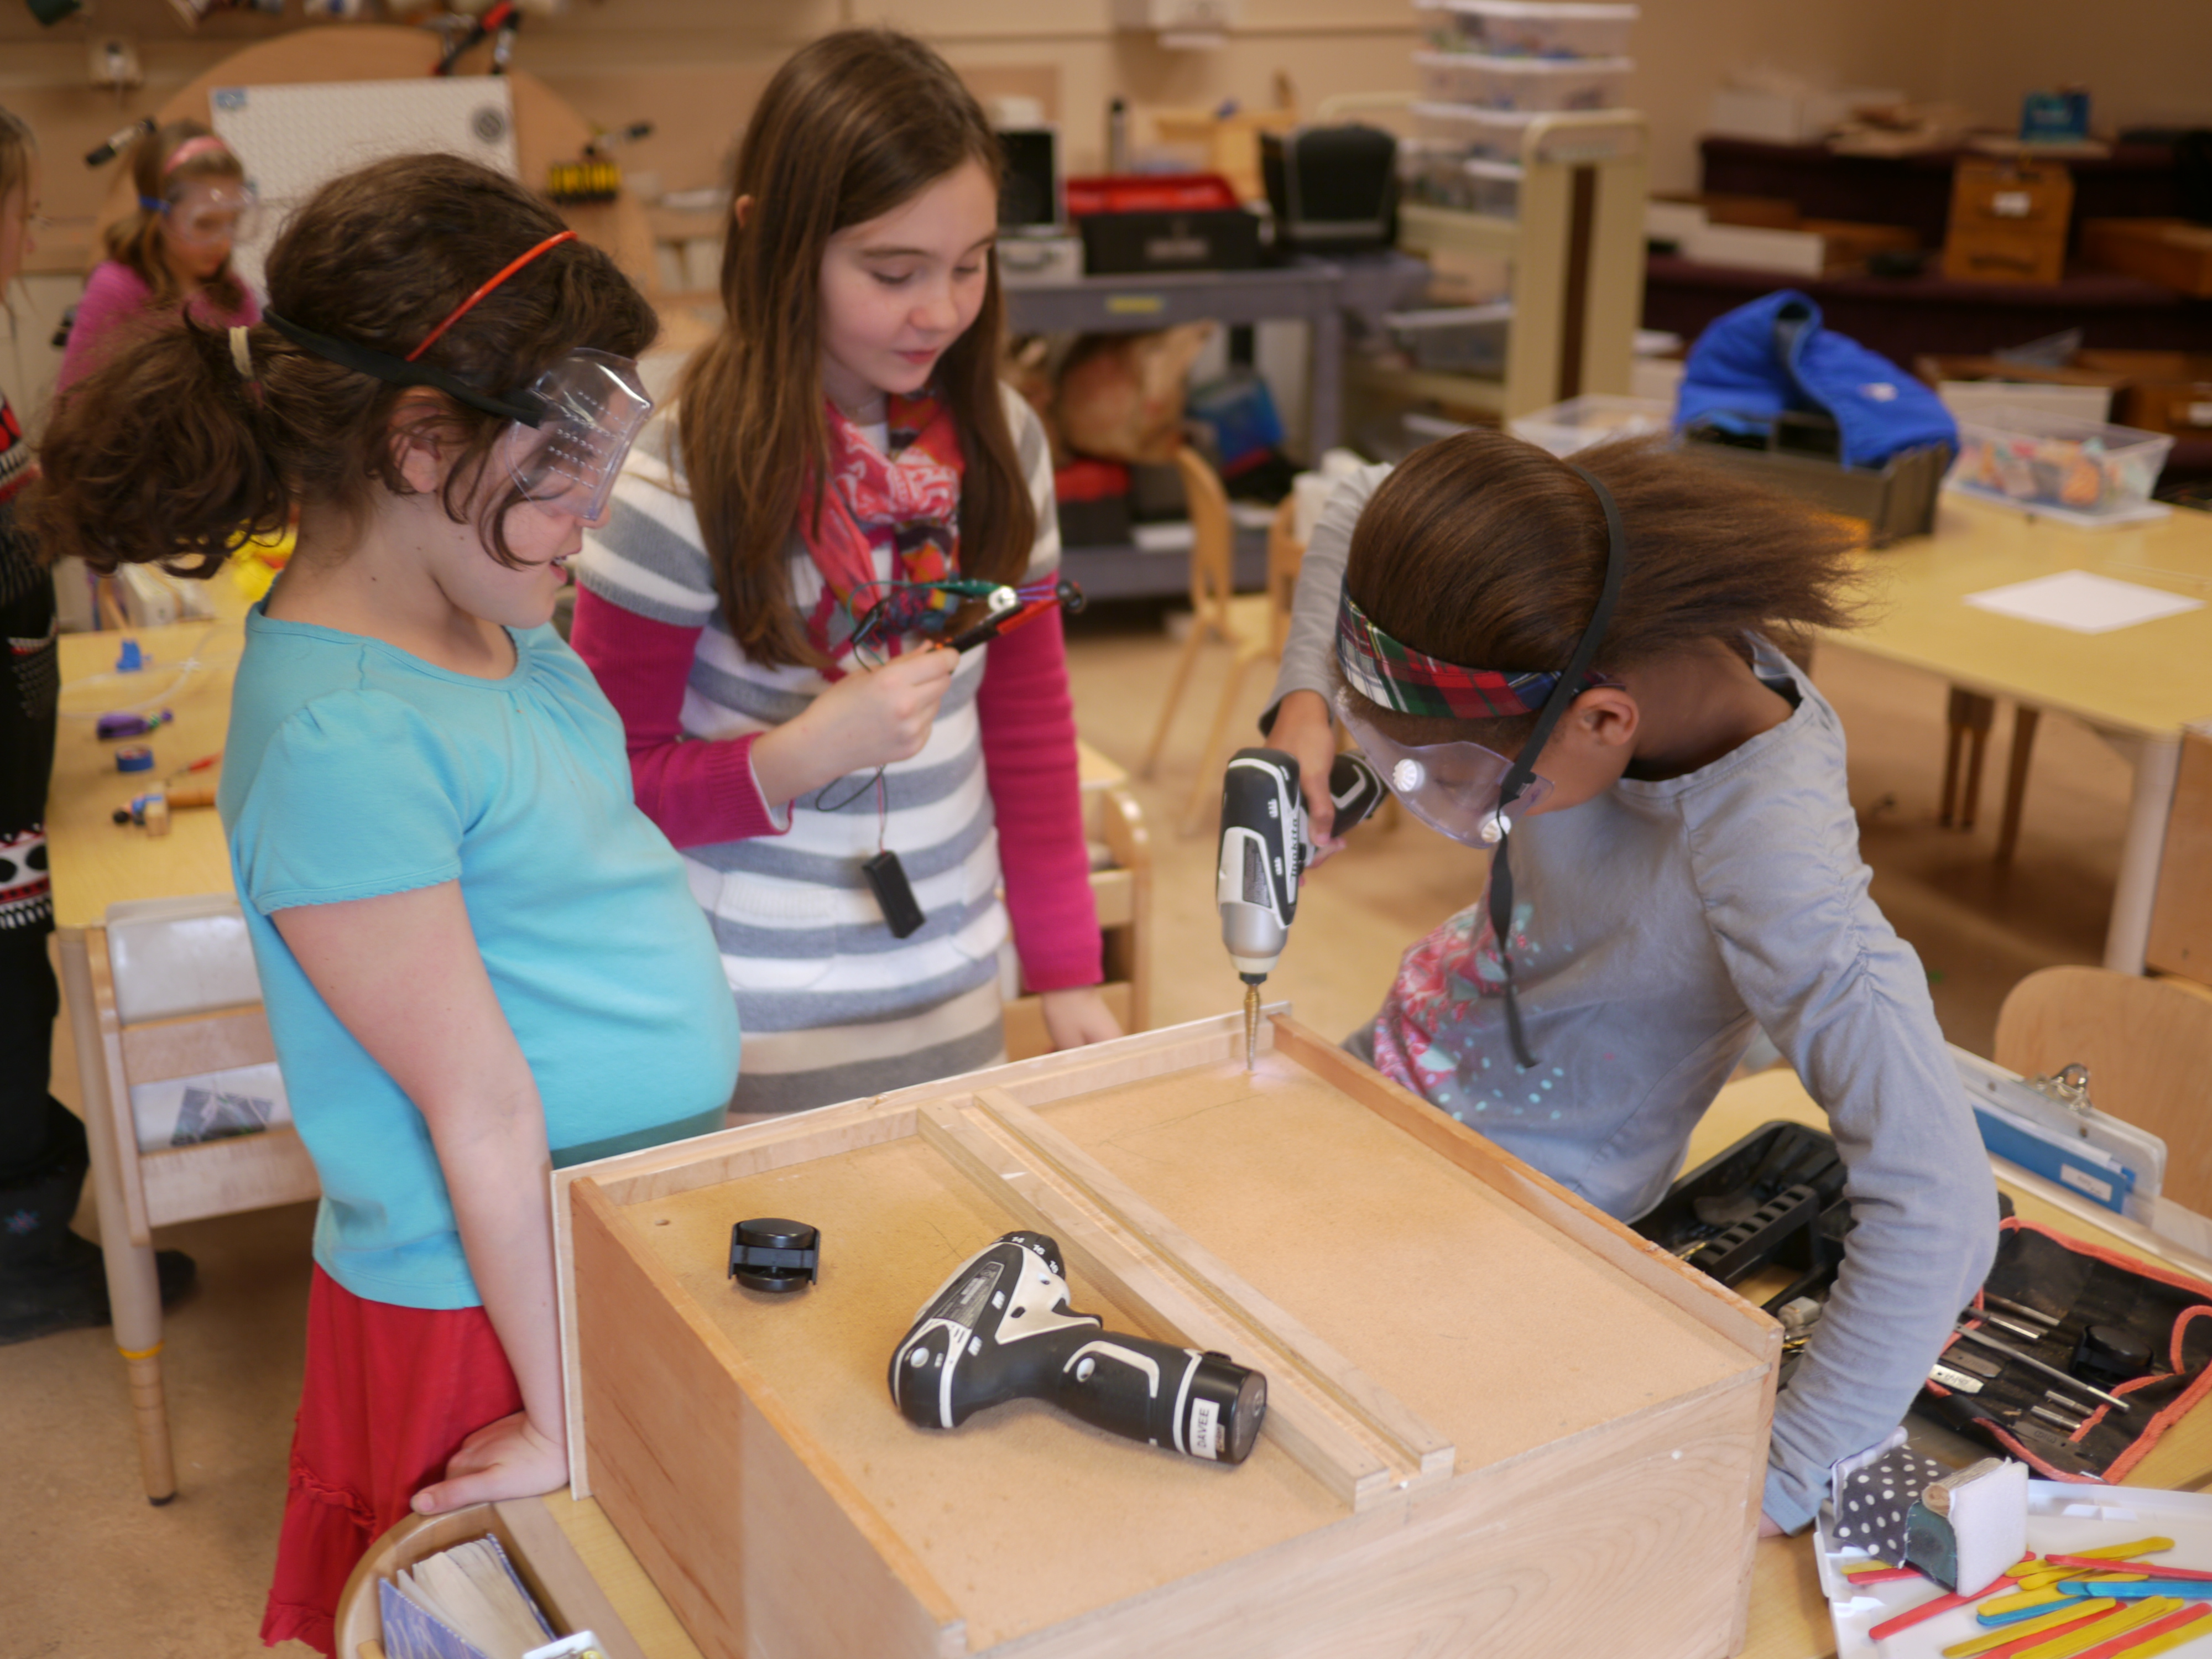 Promoting a Maker Mentality in Youth